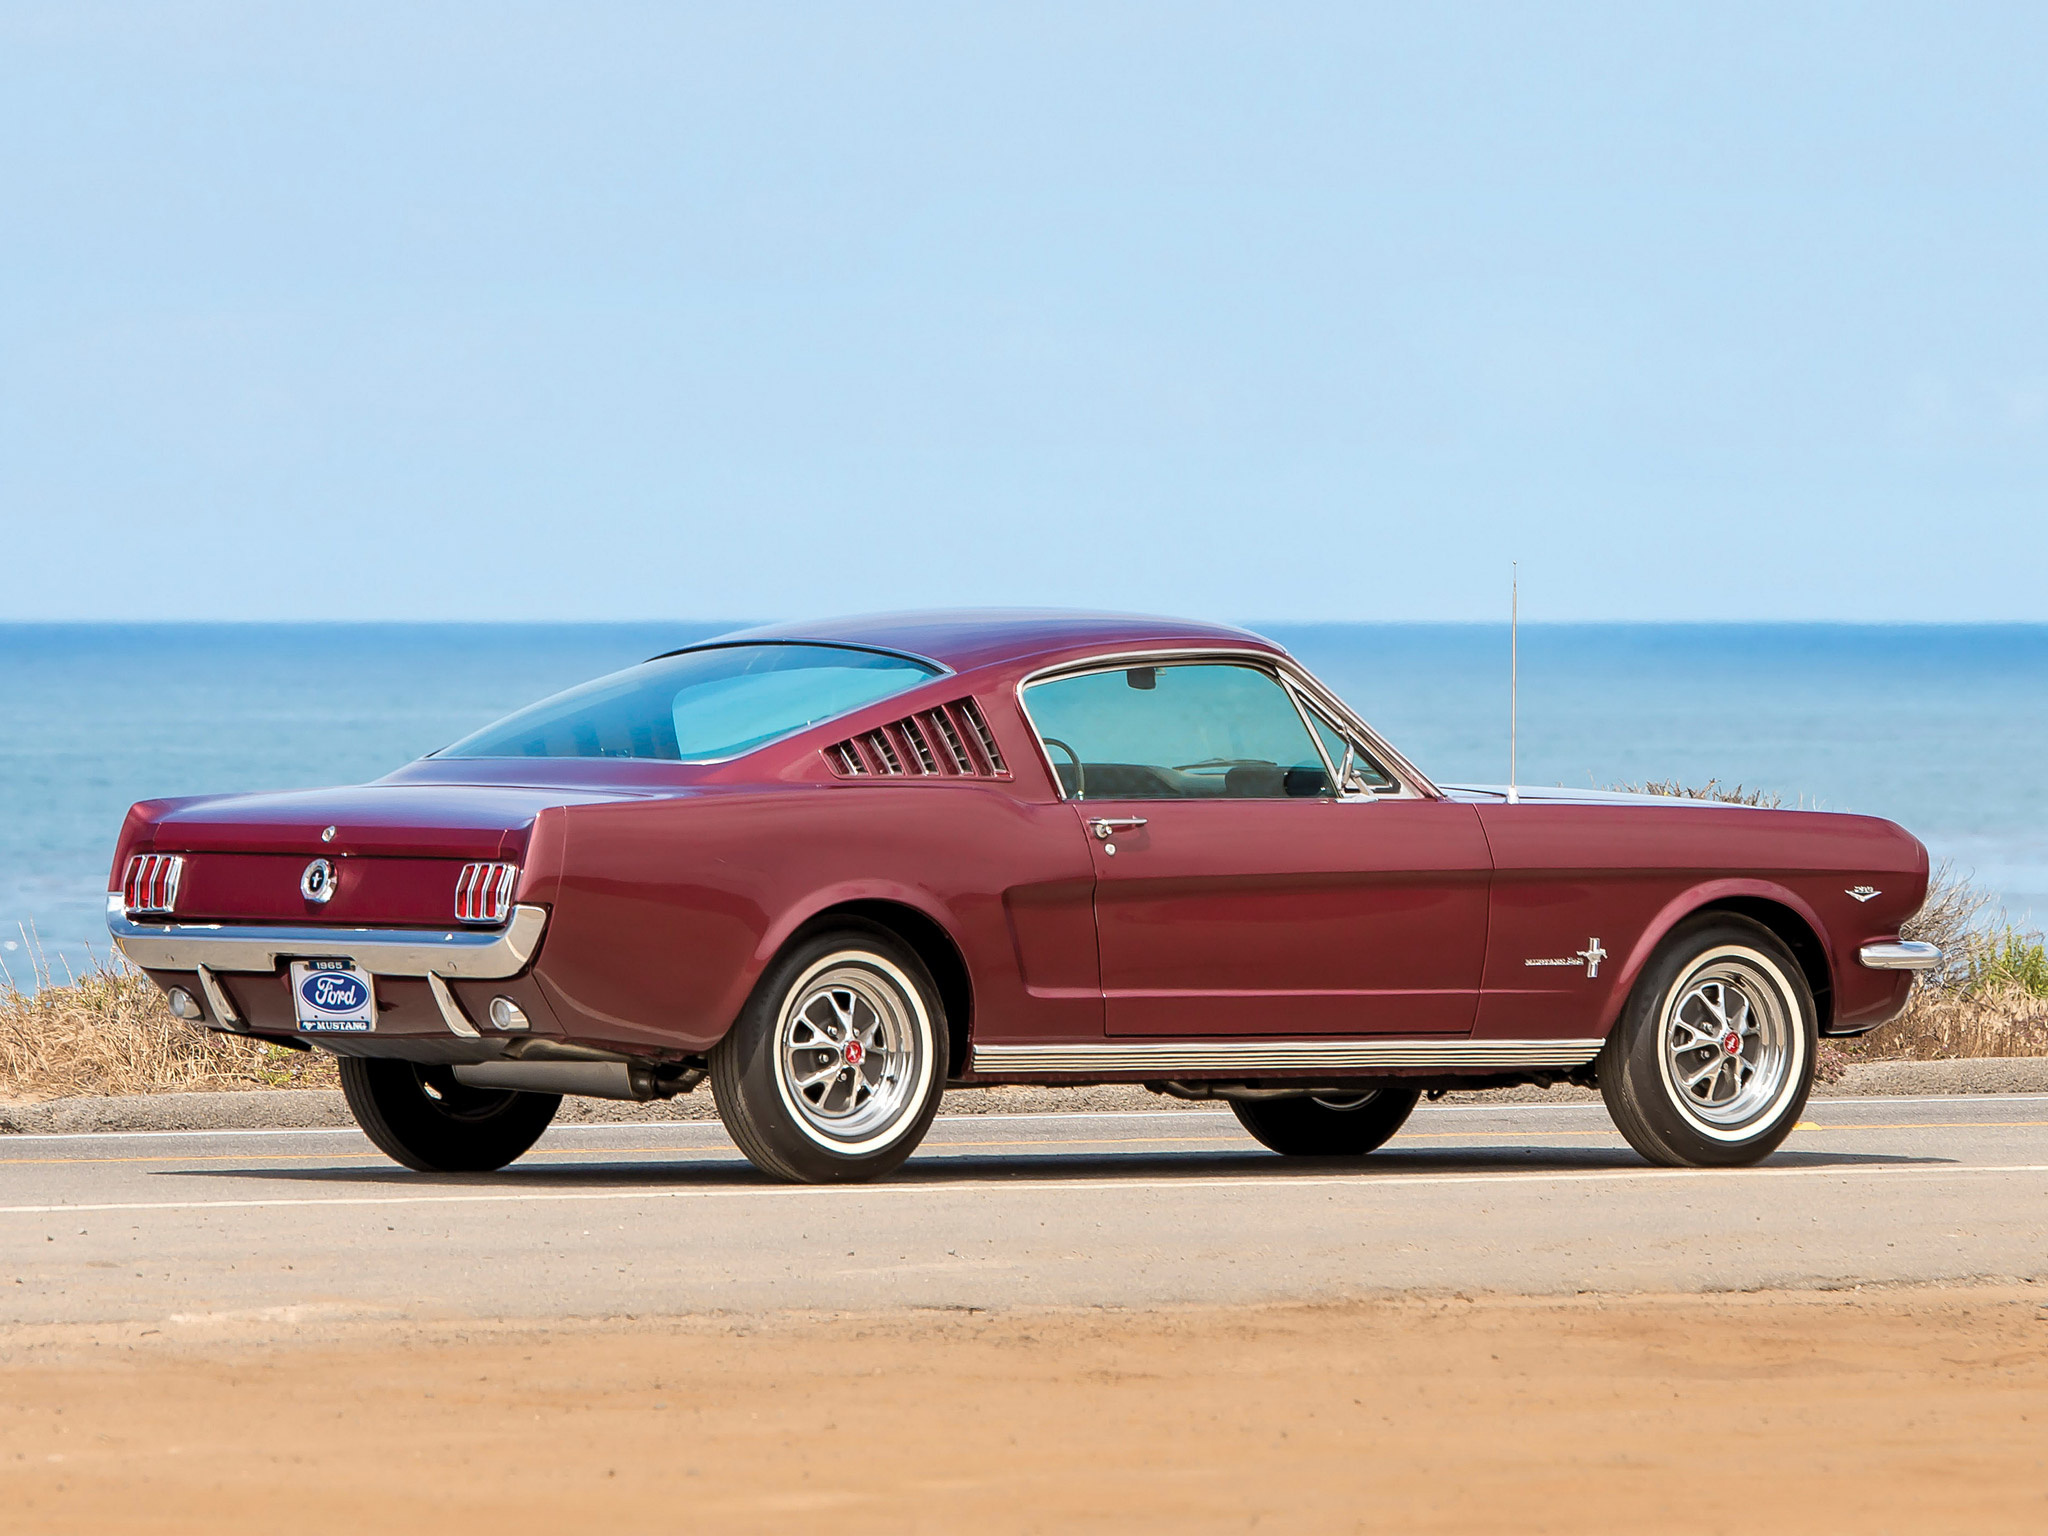 1965 Ford Mustang Fastback, Vintage charm, Timeless classic, Collector's dream, 2050x1540 HD Desktop